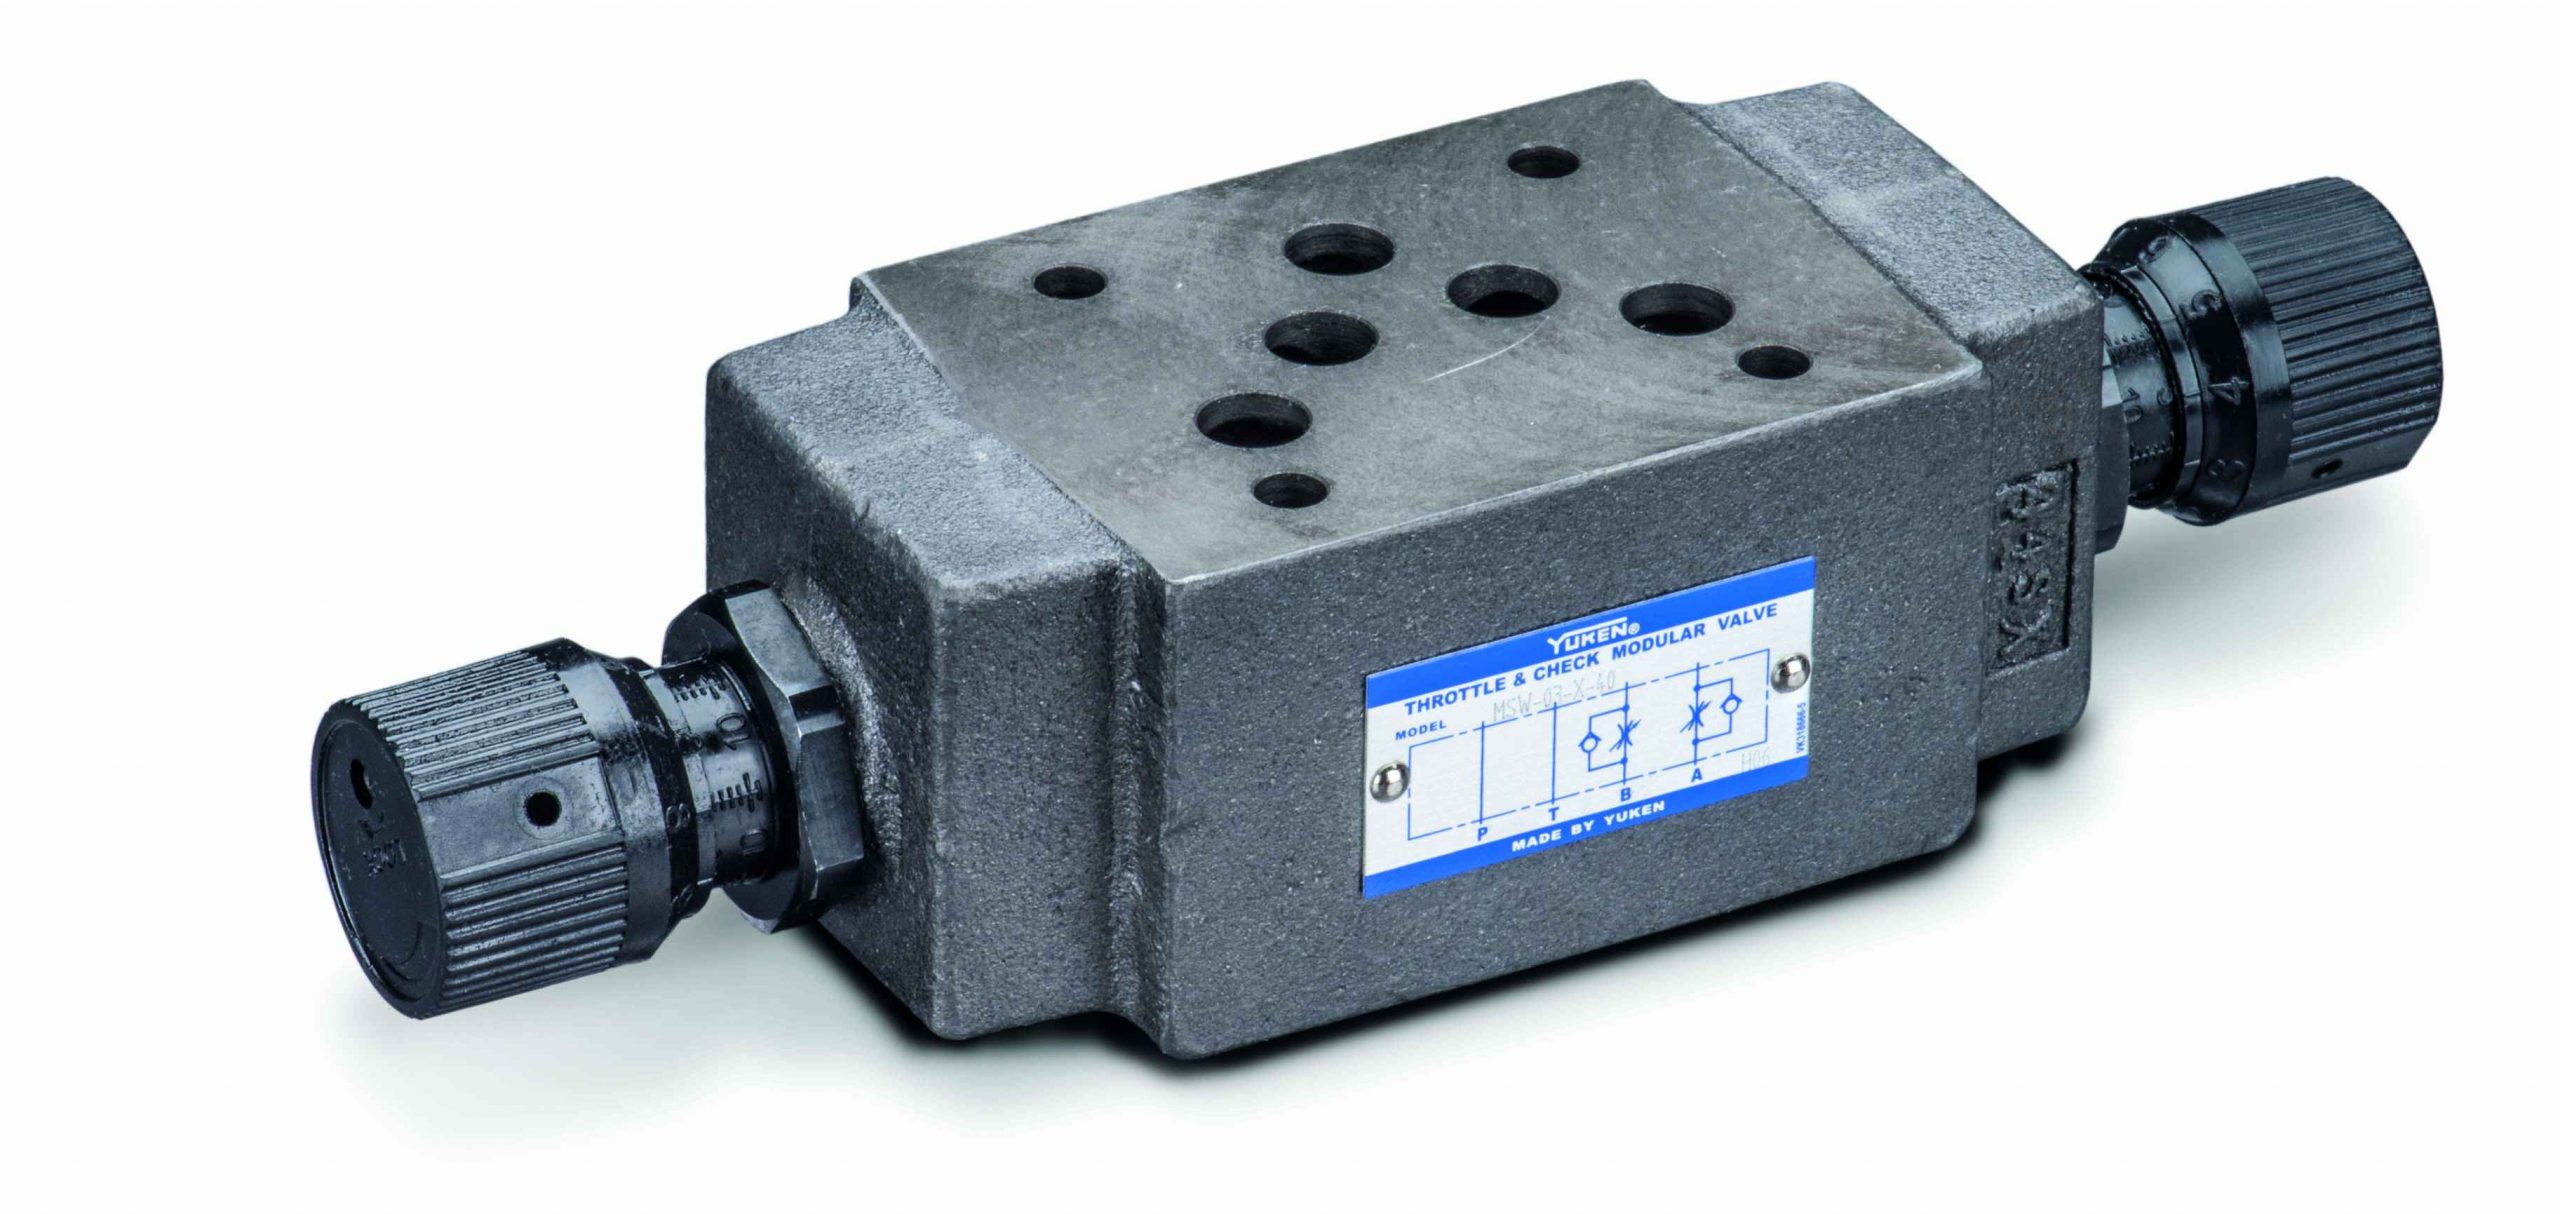 Cetop 5 (NG10) Modular Valves > Flow Control Valve with Bypass Check | Hydraulic specialists